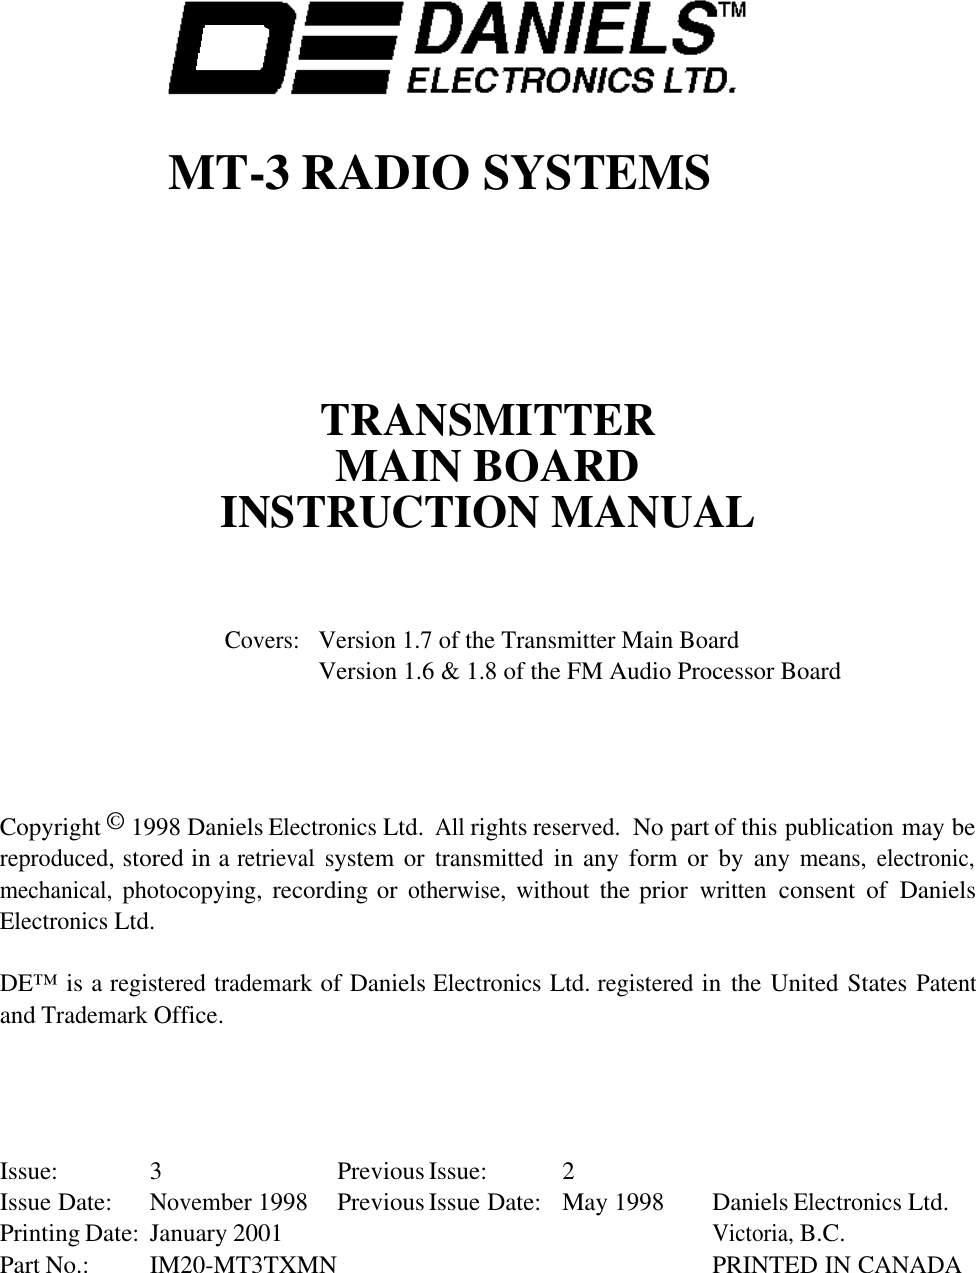 MT-3 RADIO SYSTEMSTRANSMITTERMAIN BOARDINSTRUCTION MANUALCovers:Version 1.7 of the Transmitter Main BoardVersion 1.6 &amp; 1.8 of the FM Audio Processor BoardCopyright © 1998 Daniels Electronics Ltd.  All rights reserved.  No part of this publication may bereproduced, stored in a retrieval system or transmitted in any form or  by  any means, electronic,mechanical, photocopying, recording or otherwise, without the prior written consent  of  DanielsElectronics Ltd.DE™ is a registered trademark of Daniels Electronics Ltd. registered in the United States Patentand Trademark Office.Issue: 3 Previous Issue: 2Issue Date:November 1998 Previous Issue Date: May 1998 Daniels Electronics Ltd.Printing Date: January 2001Victoria, B.C.Part No.: IM20-MT3TXMN PRINTED IN CANADA